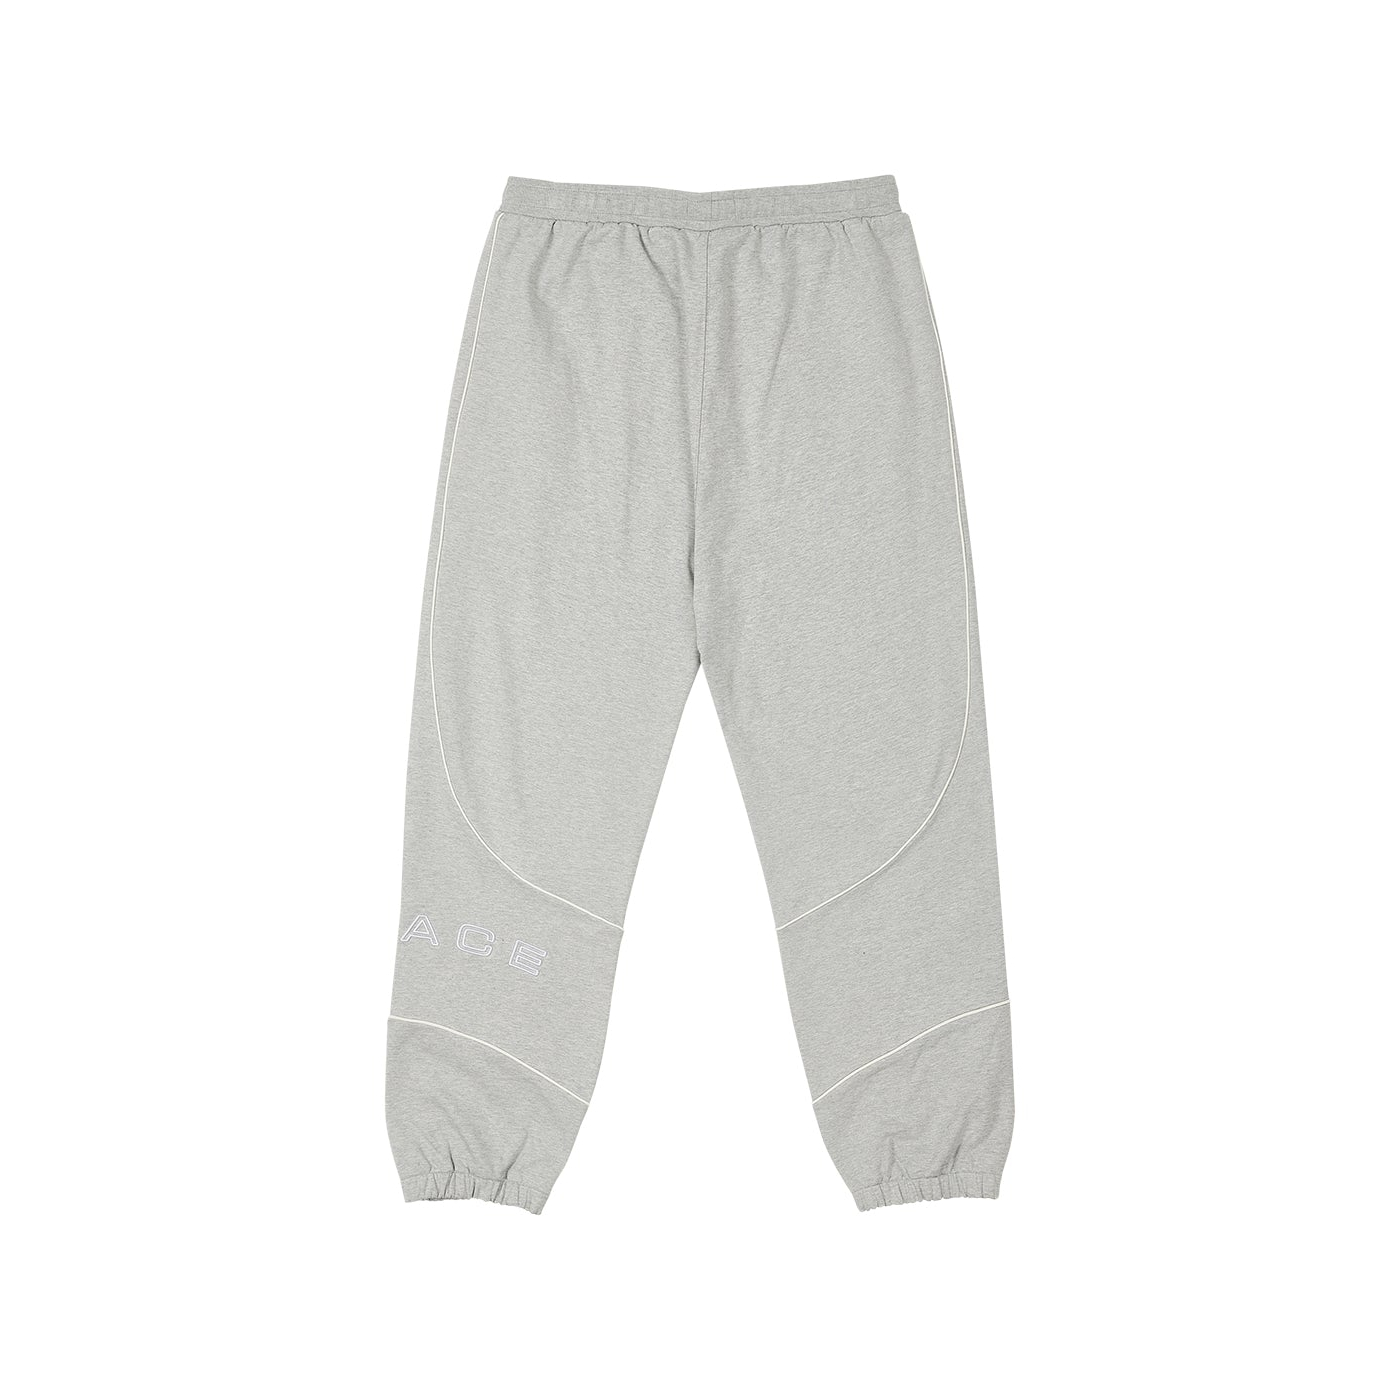 Thumbnail SPORT PIPED JOGGER GREY MARL one color